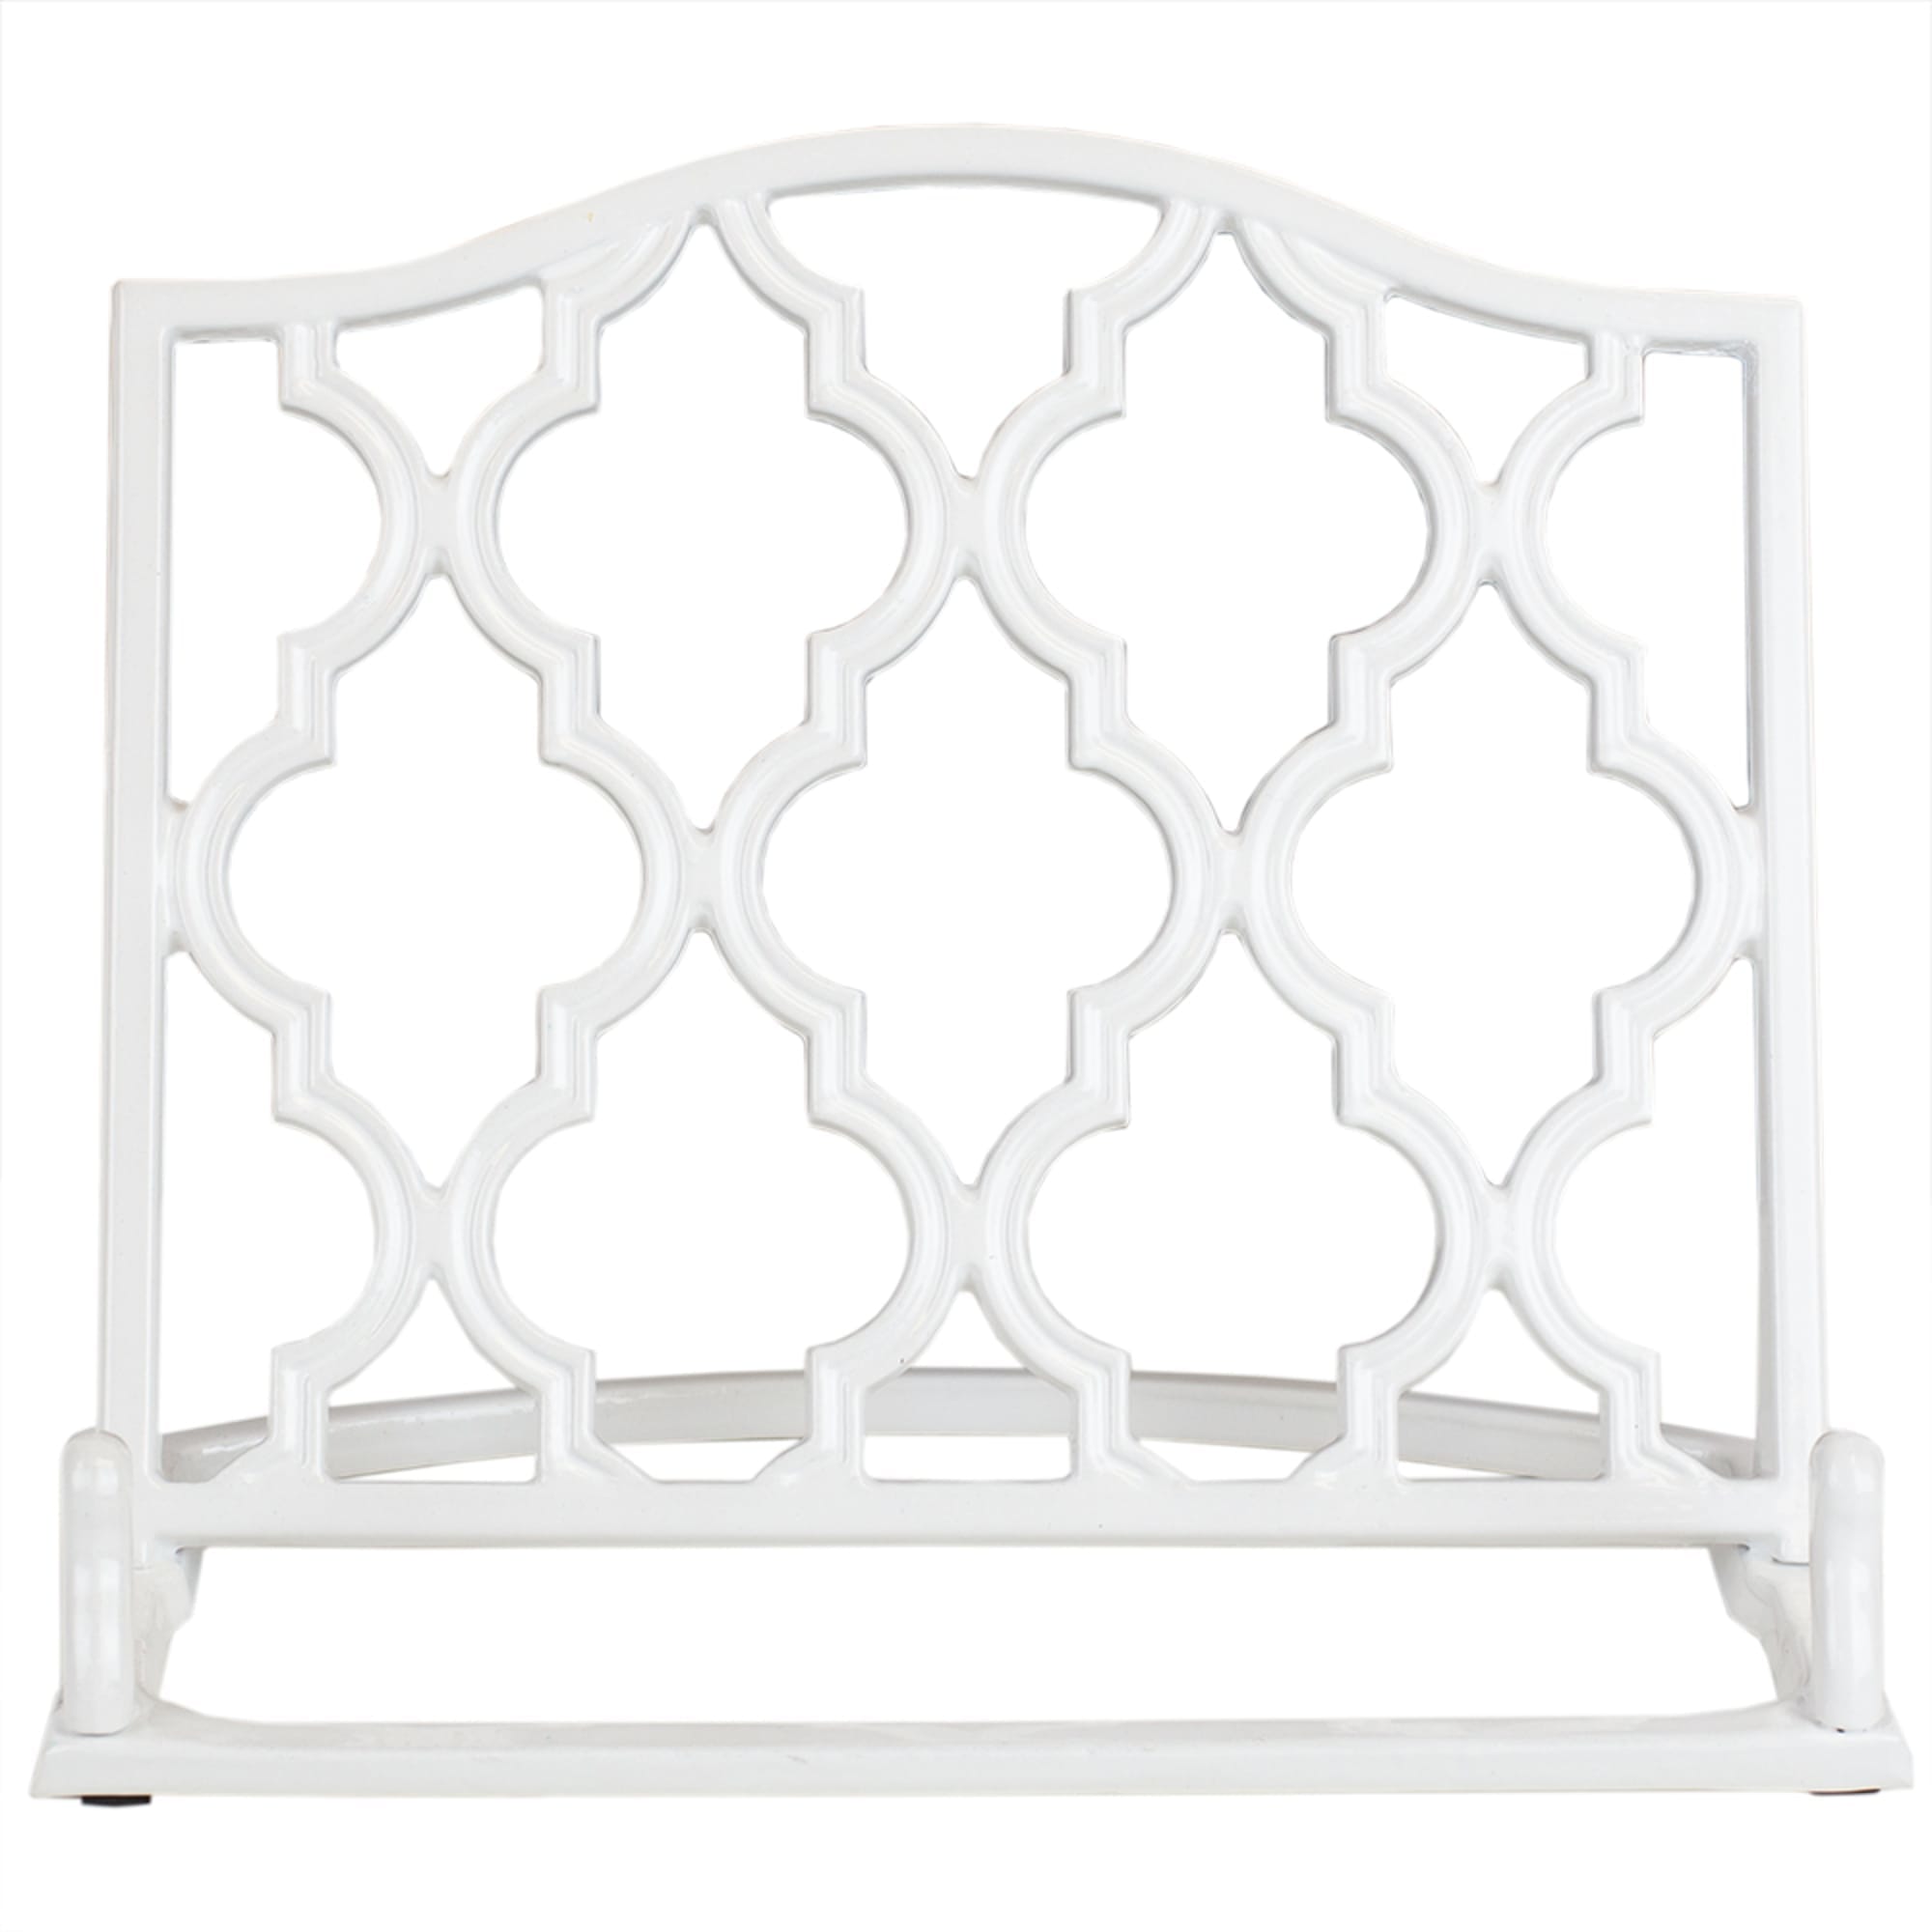 Home Basics Lattice Collection Cast Iron Non-Skid Reading Rest Cookbook Holder, White $15 EACH, CASE PACK OF 4